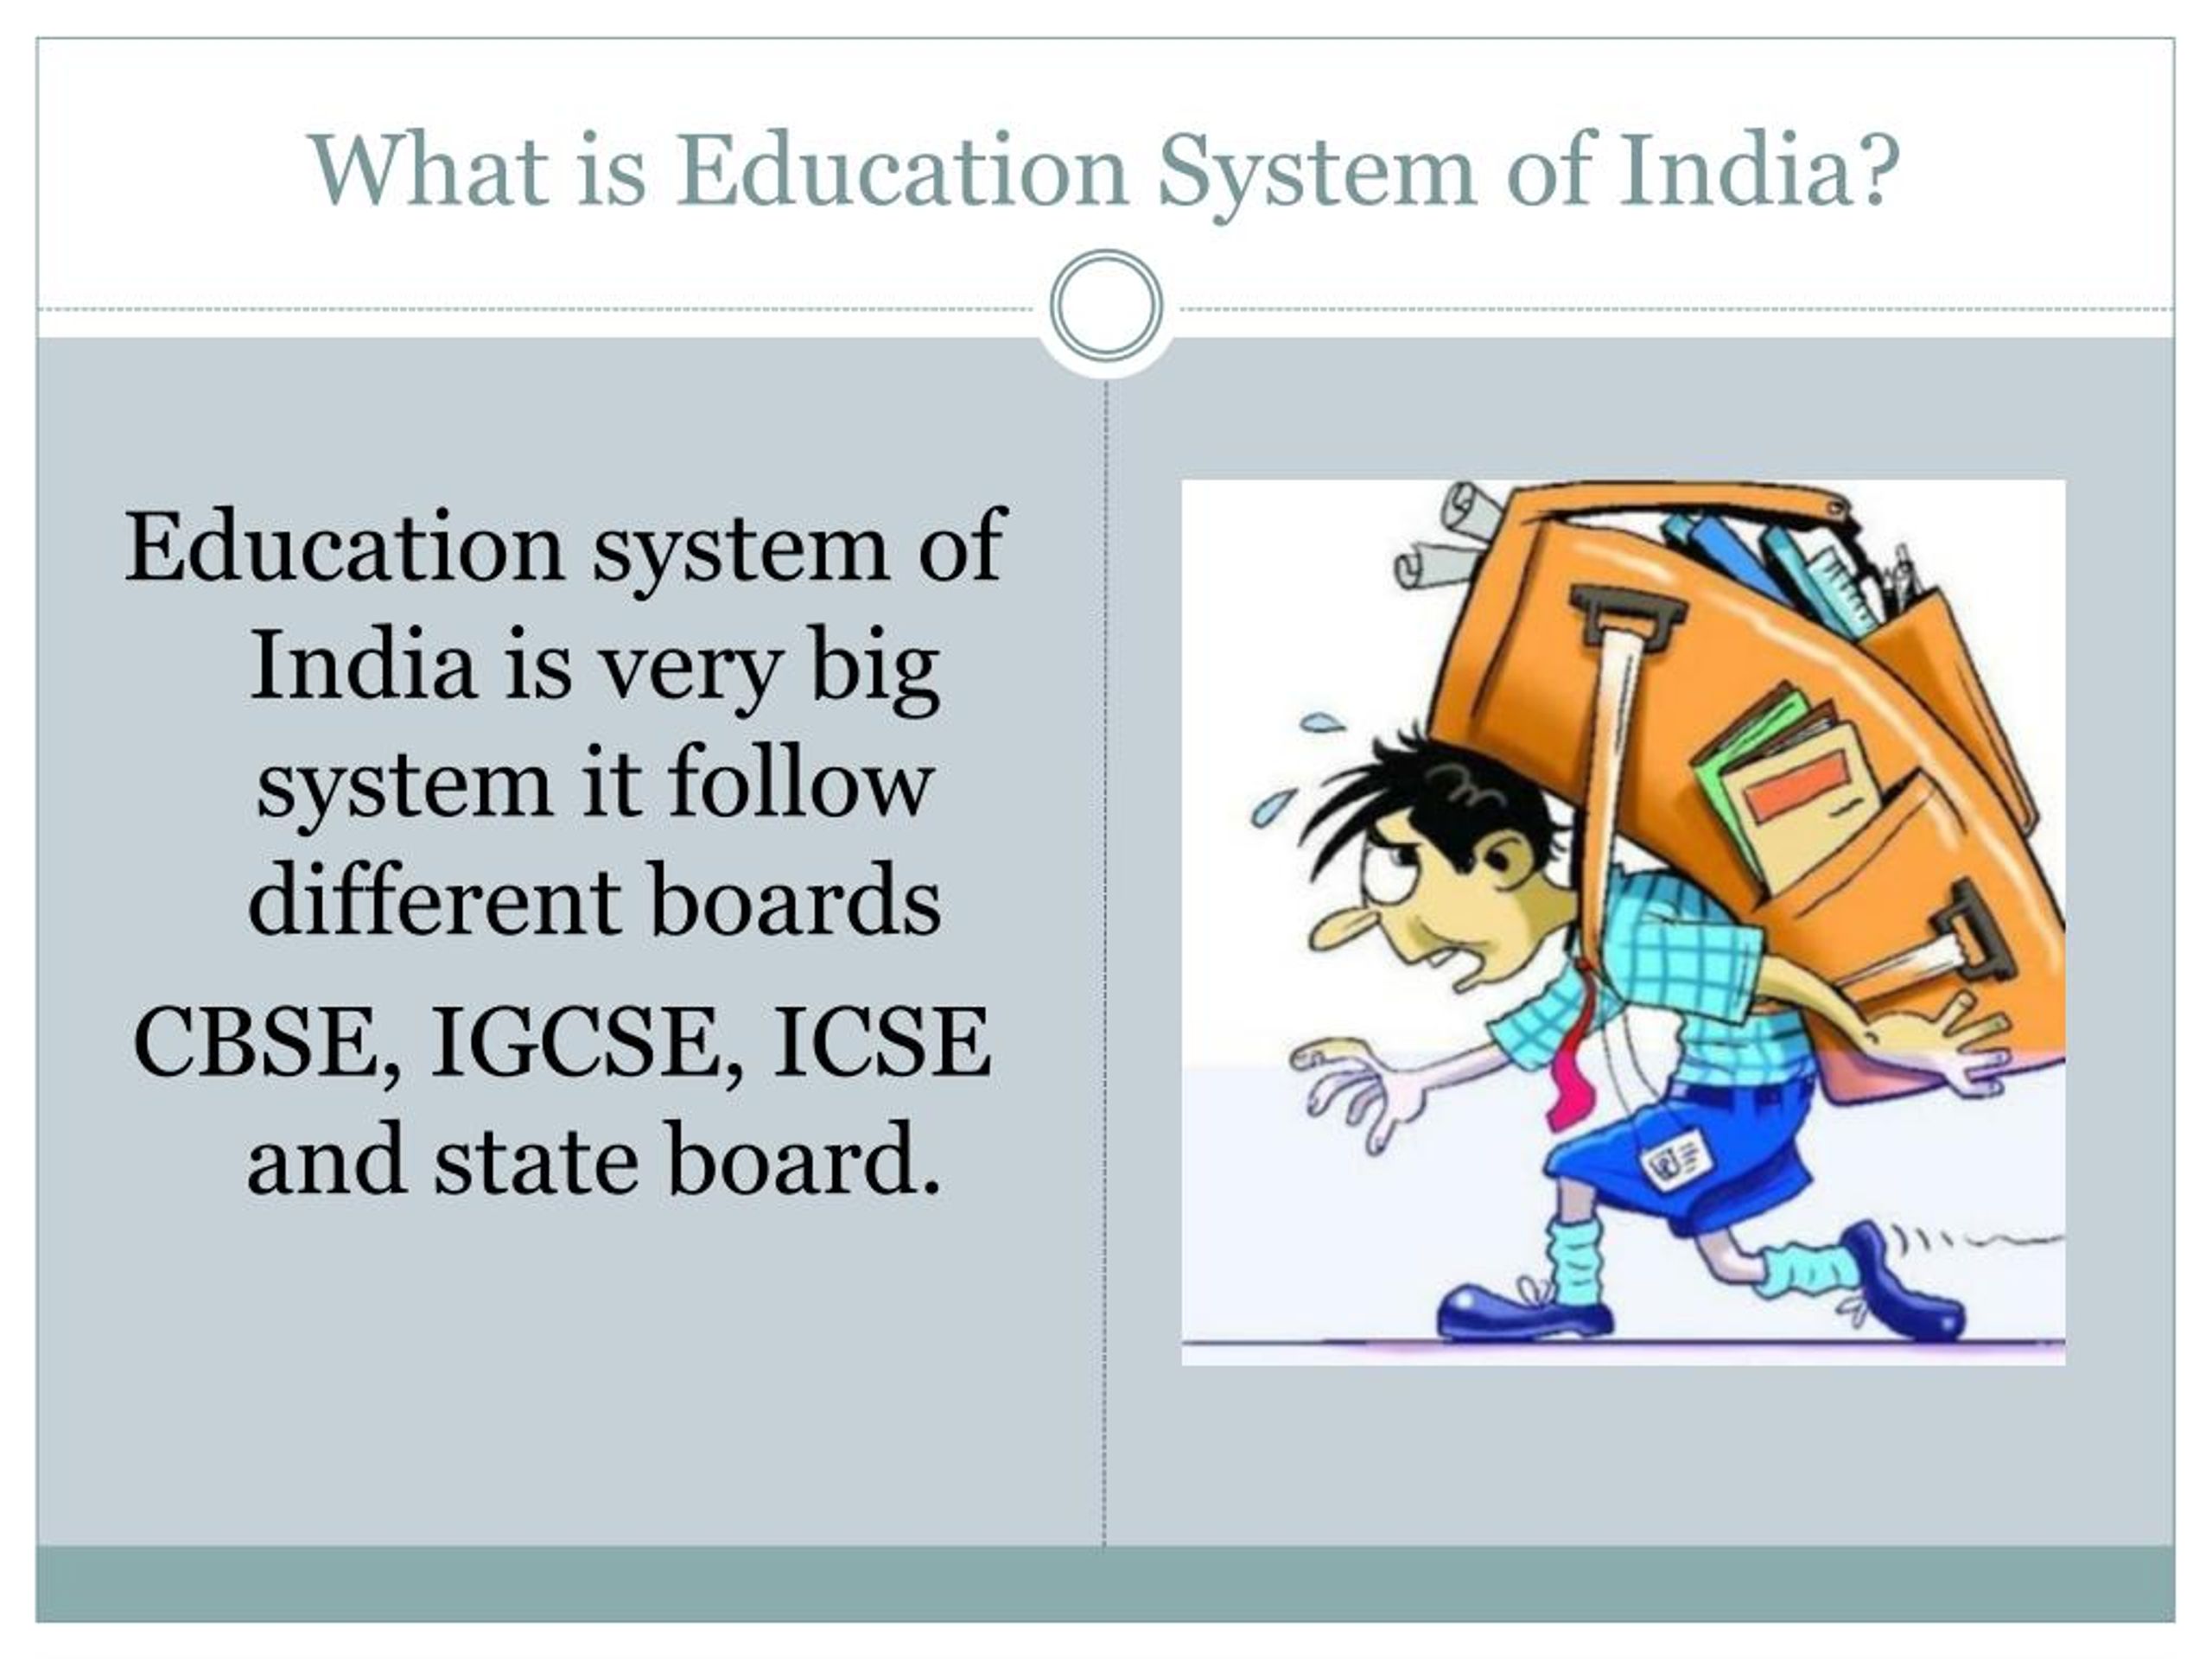 ppt on education system of india